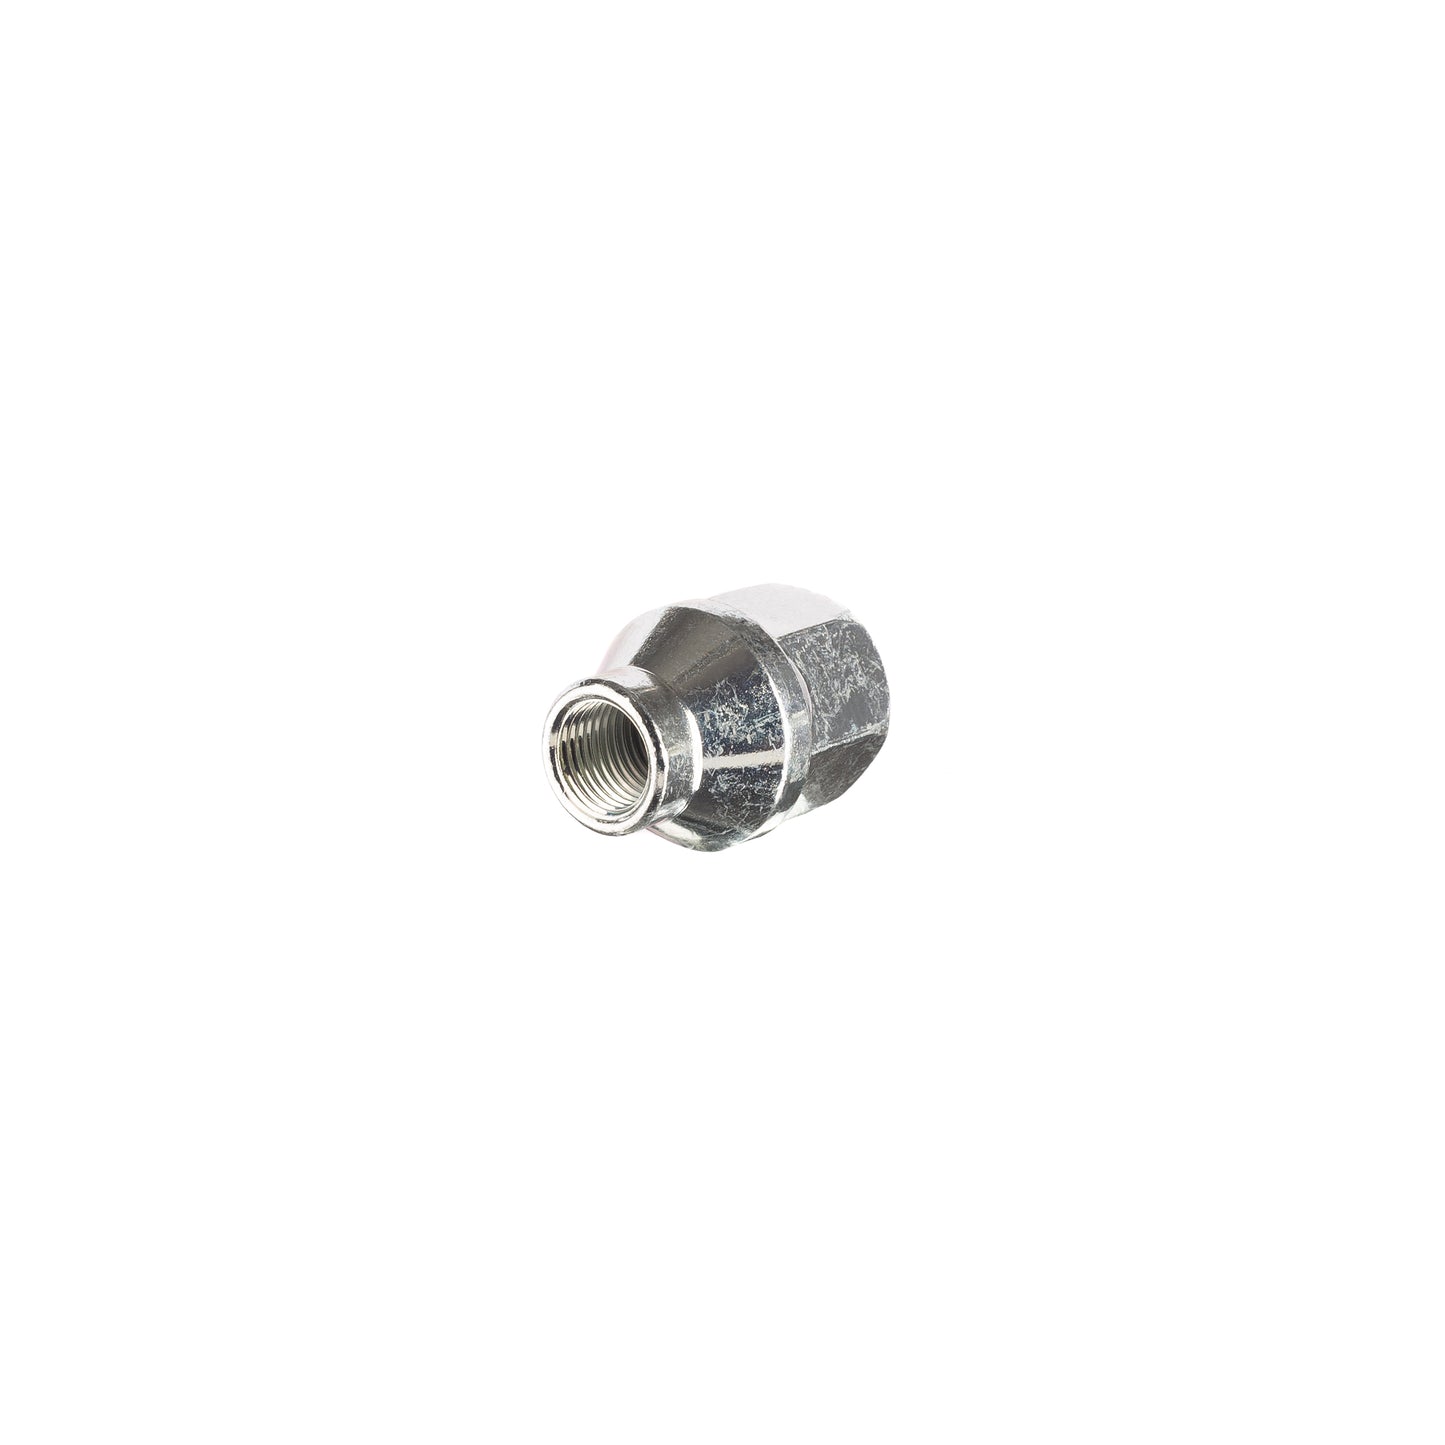 Closed Nut With Shank, 21 Hex, 34 Height, Galv